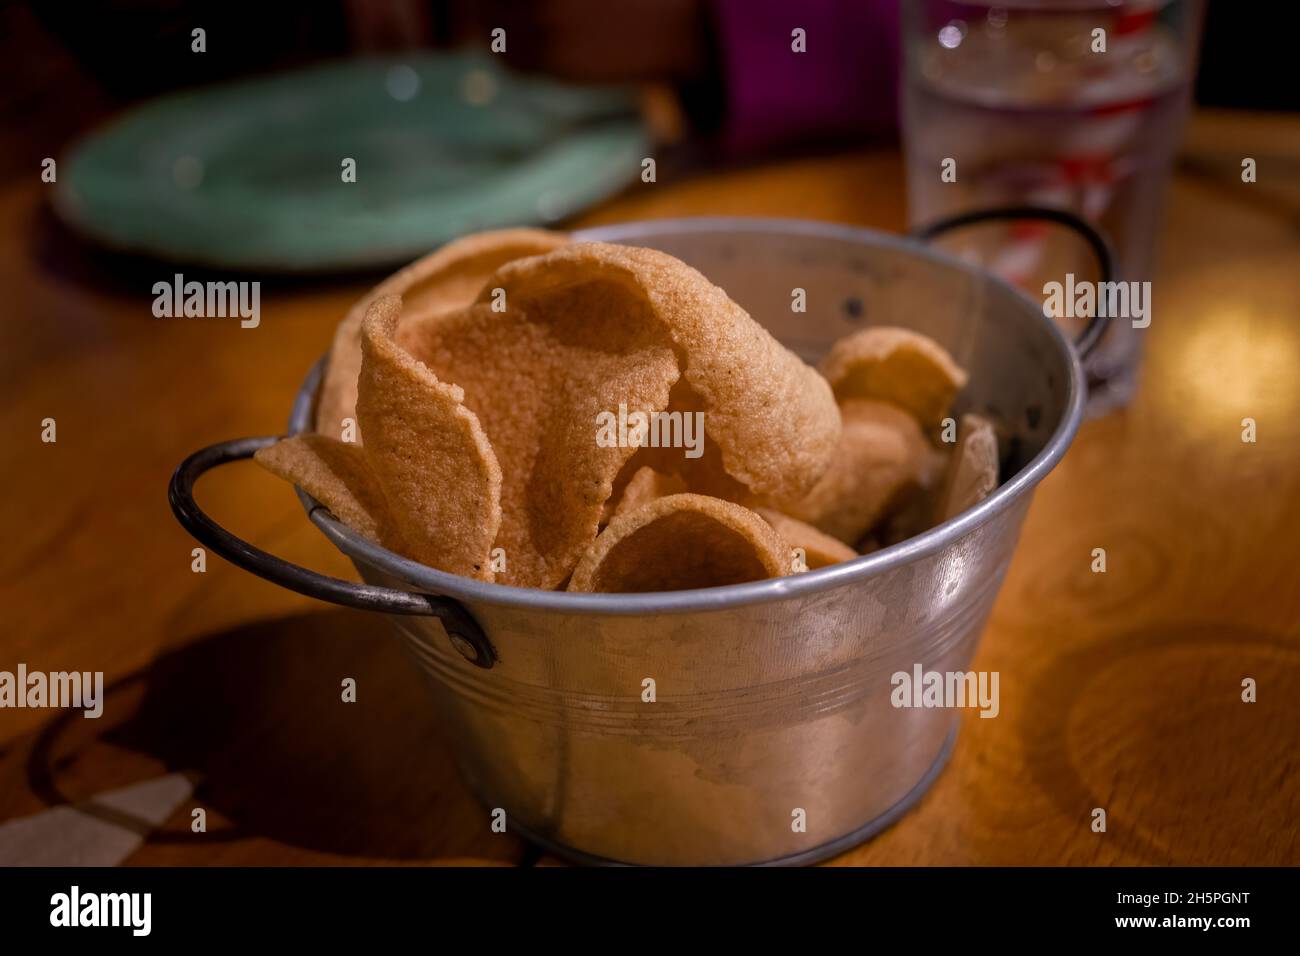 Bowl of spicy thai prawn crackers in a restaurant setting Stock Photo